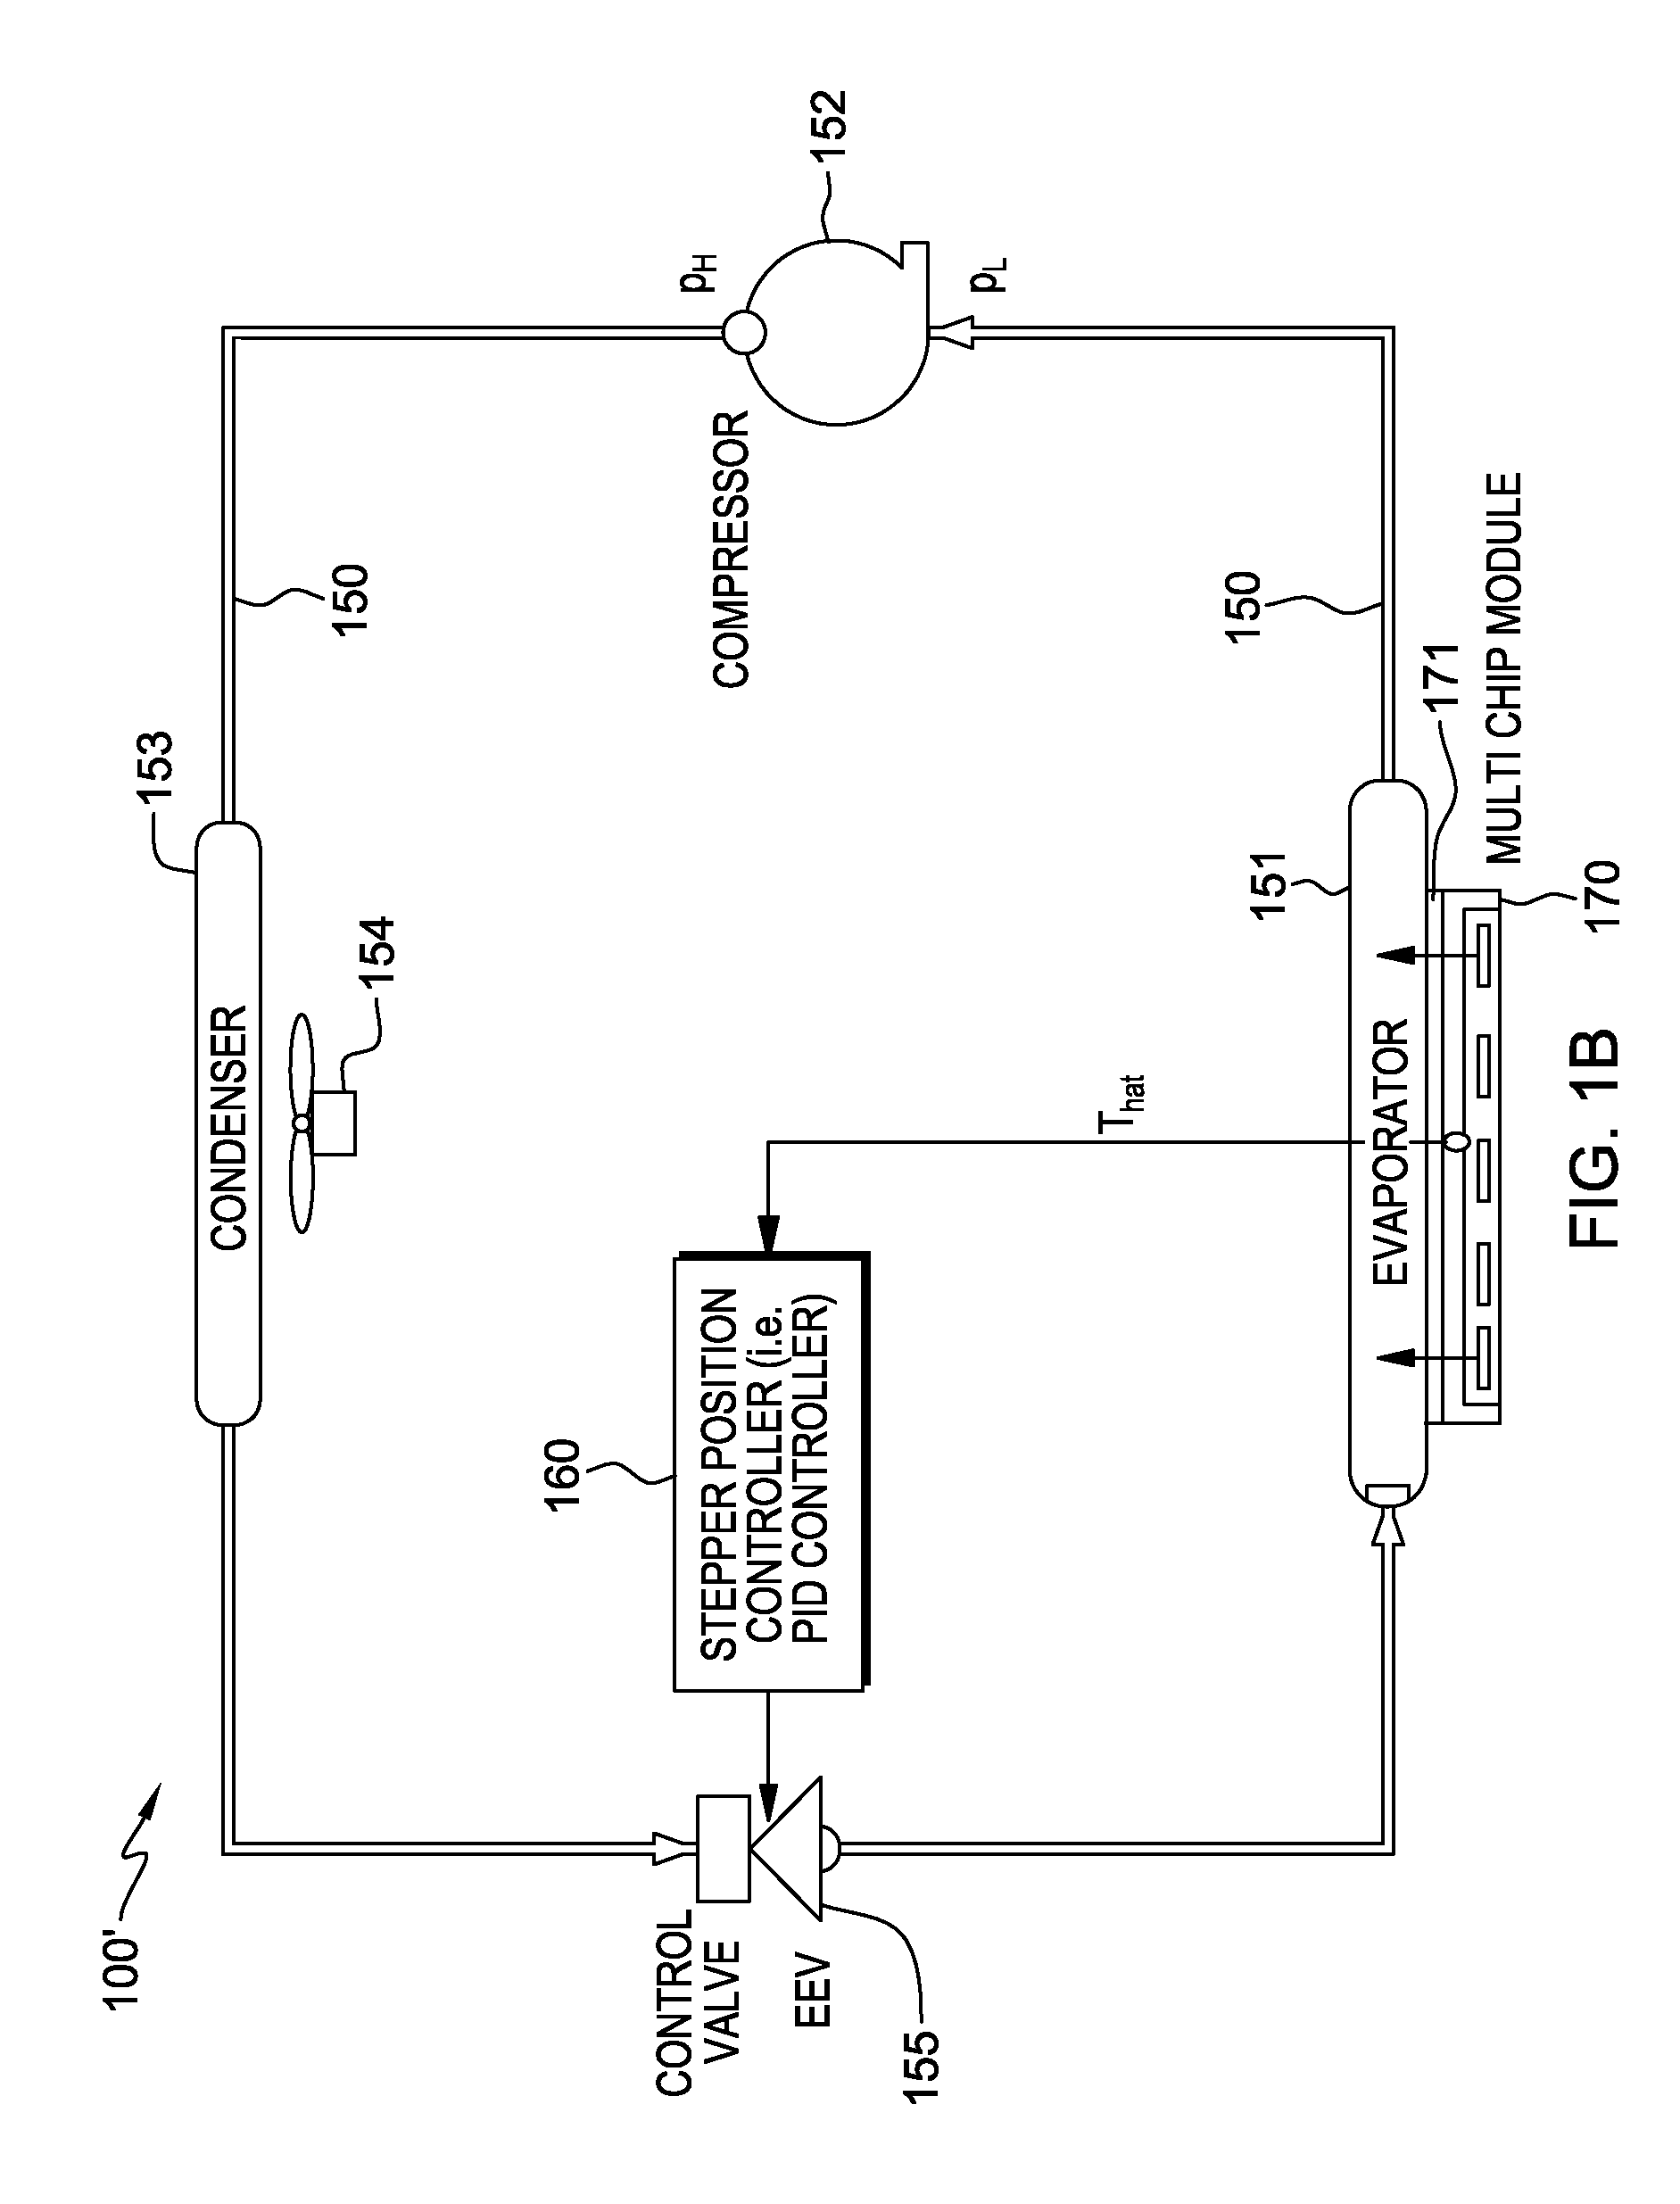 Cooling system control and servicing based on time-based variation of an operational variable